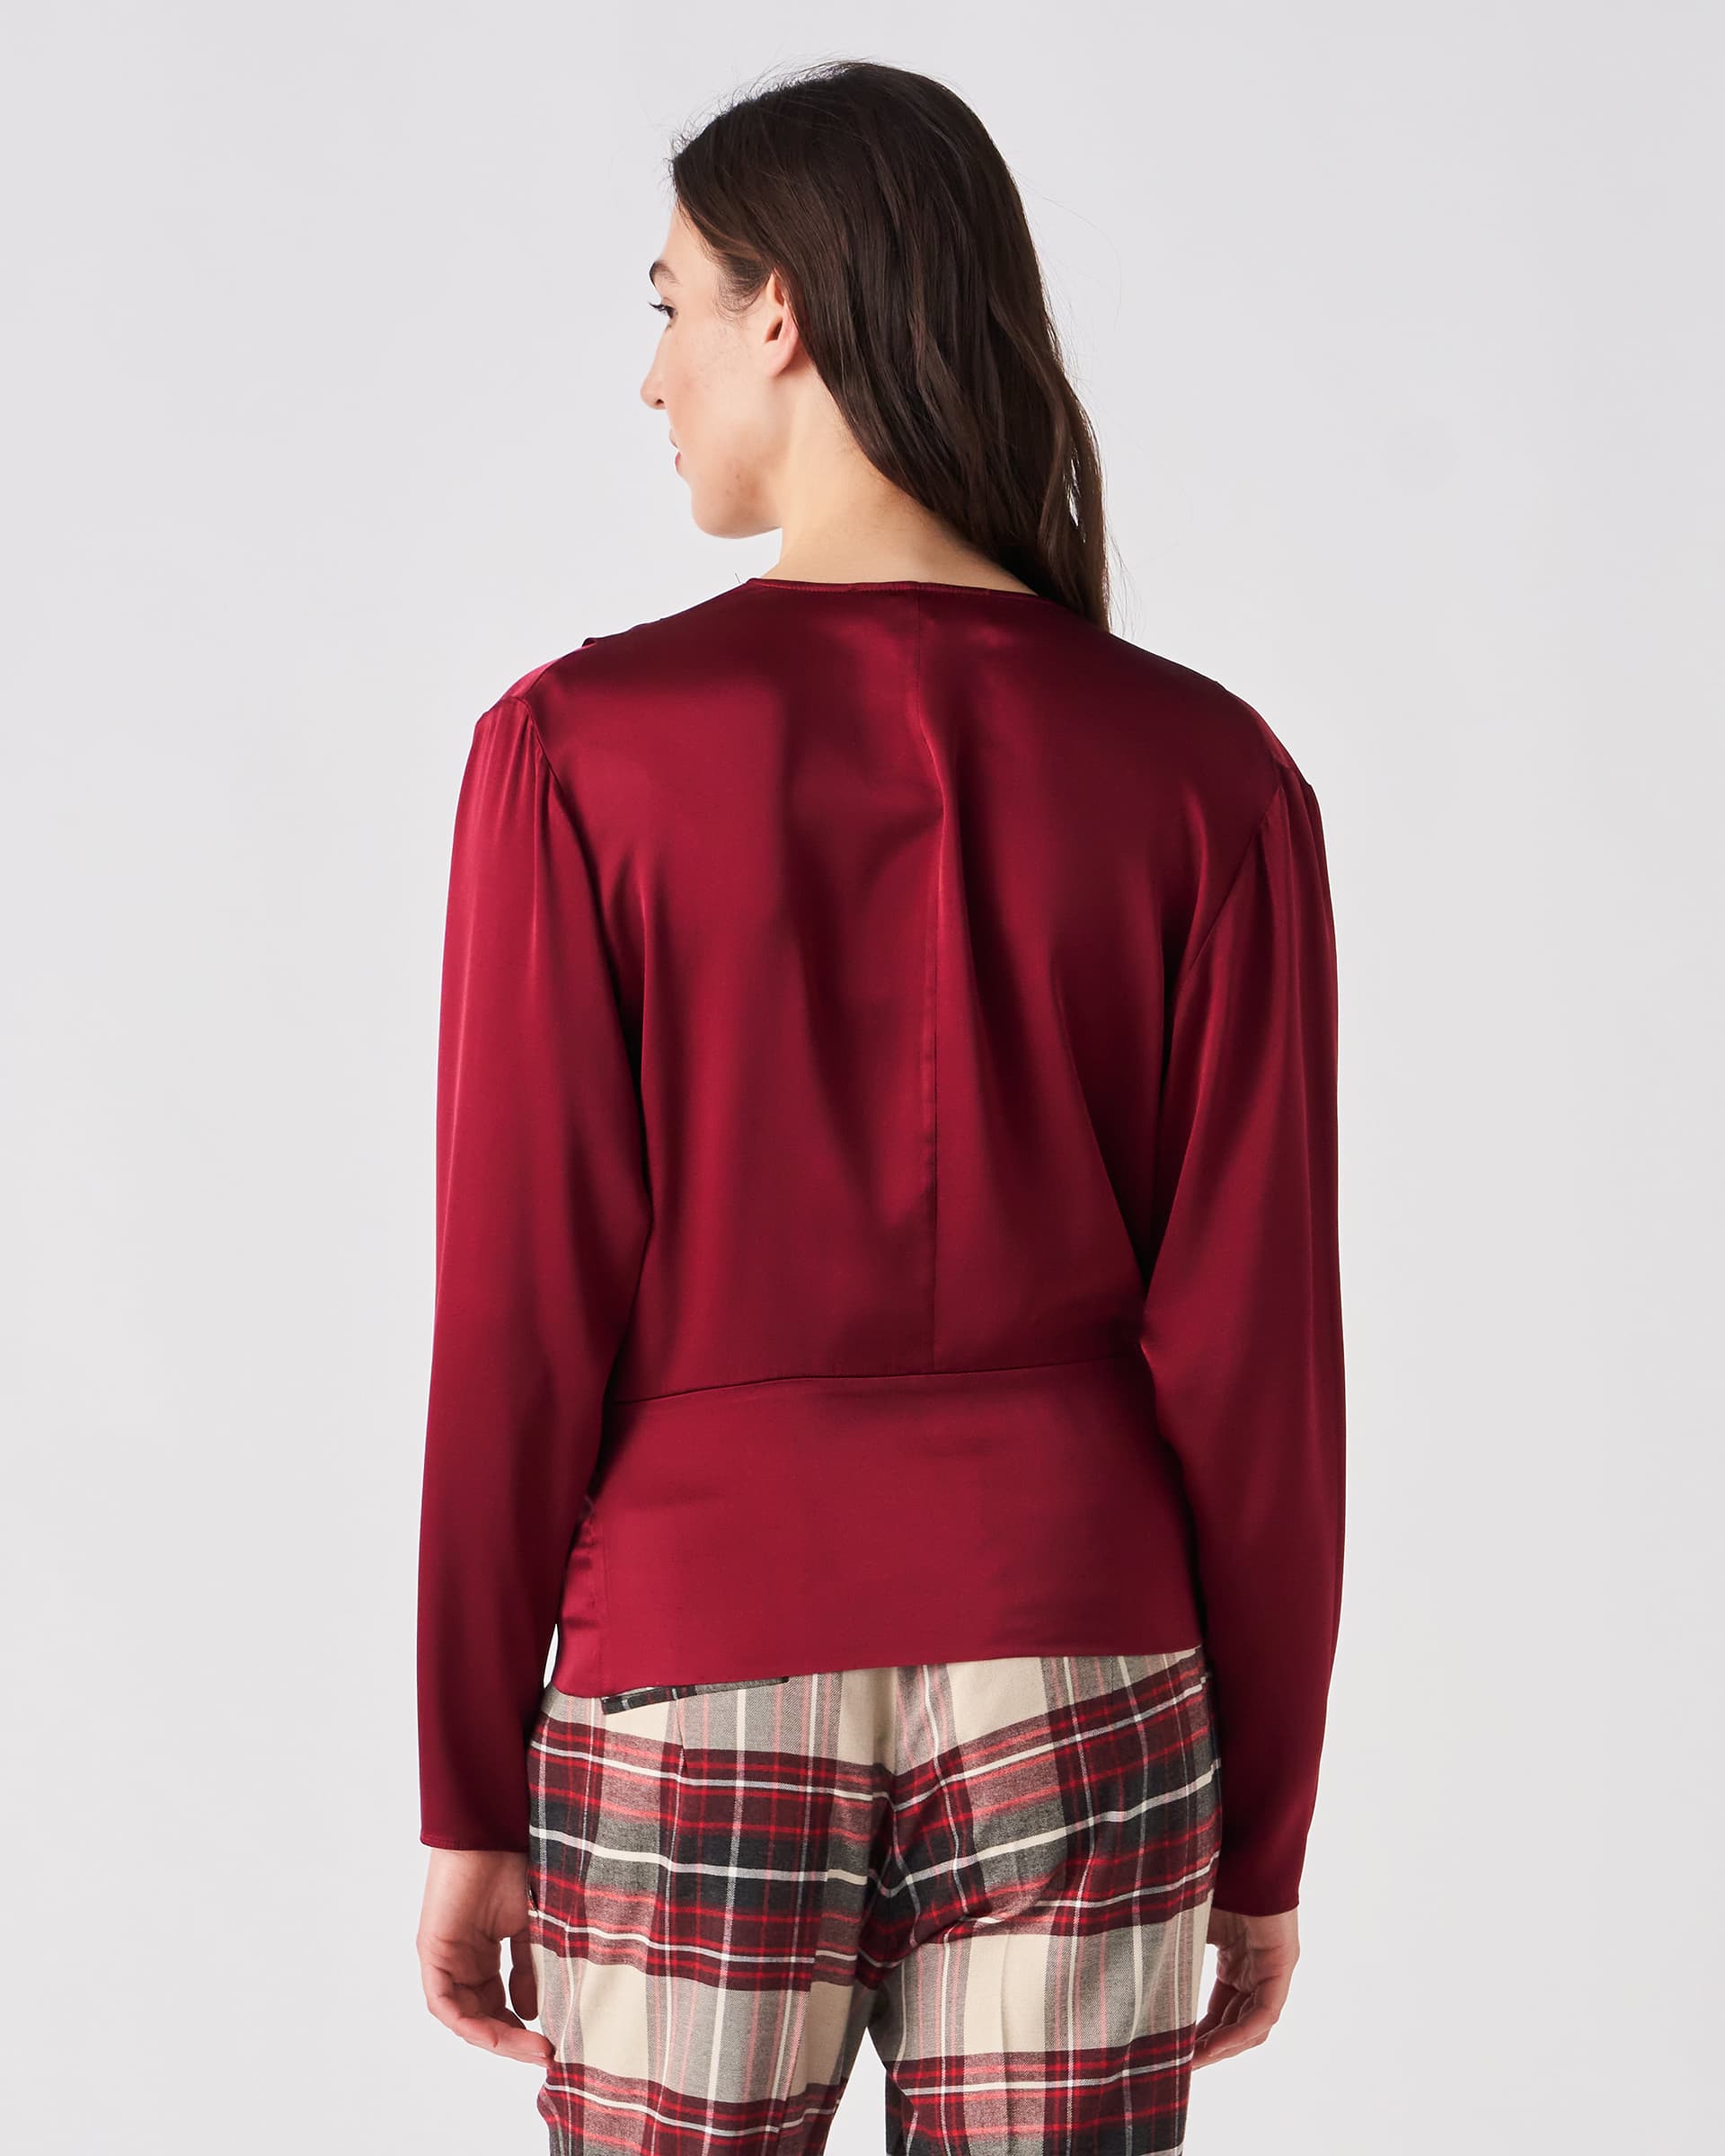 The Market Store | Blouse With Cross On The Front